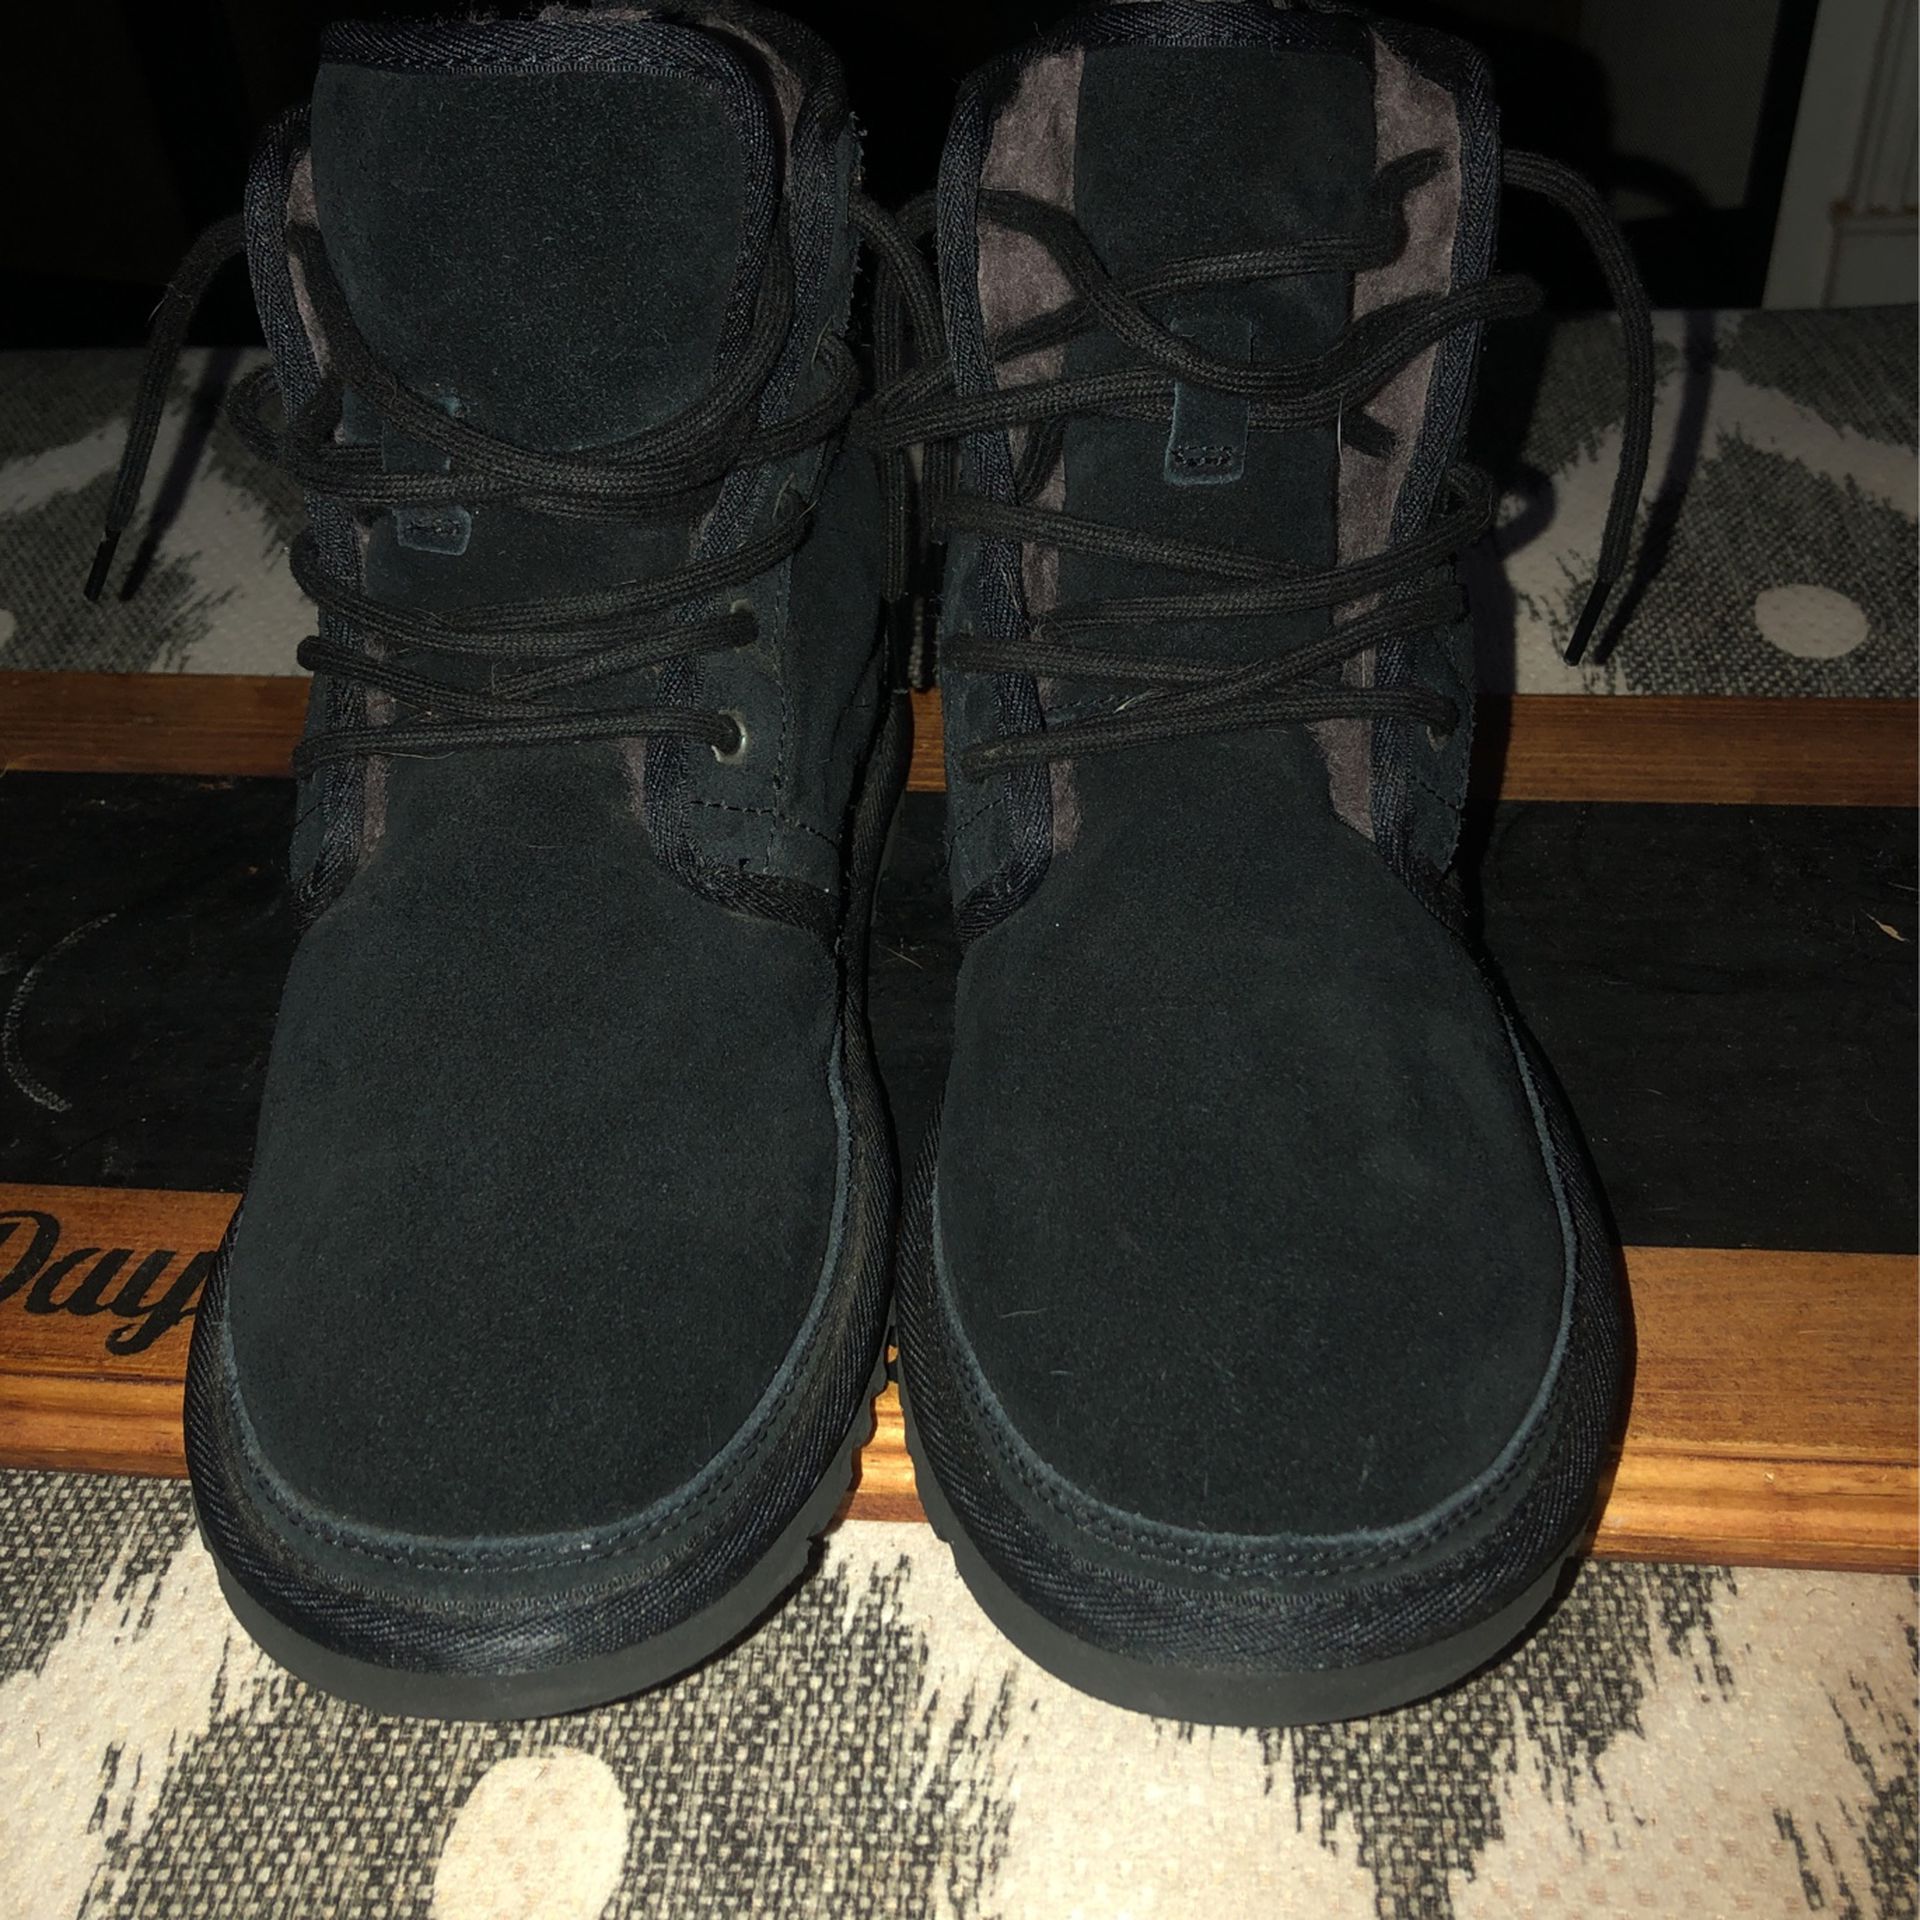 Never Worn High Top Ugg Boots Size 7